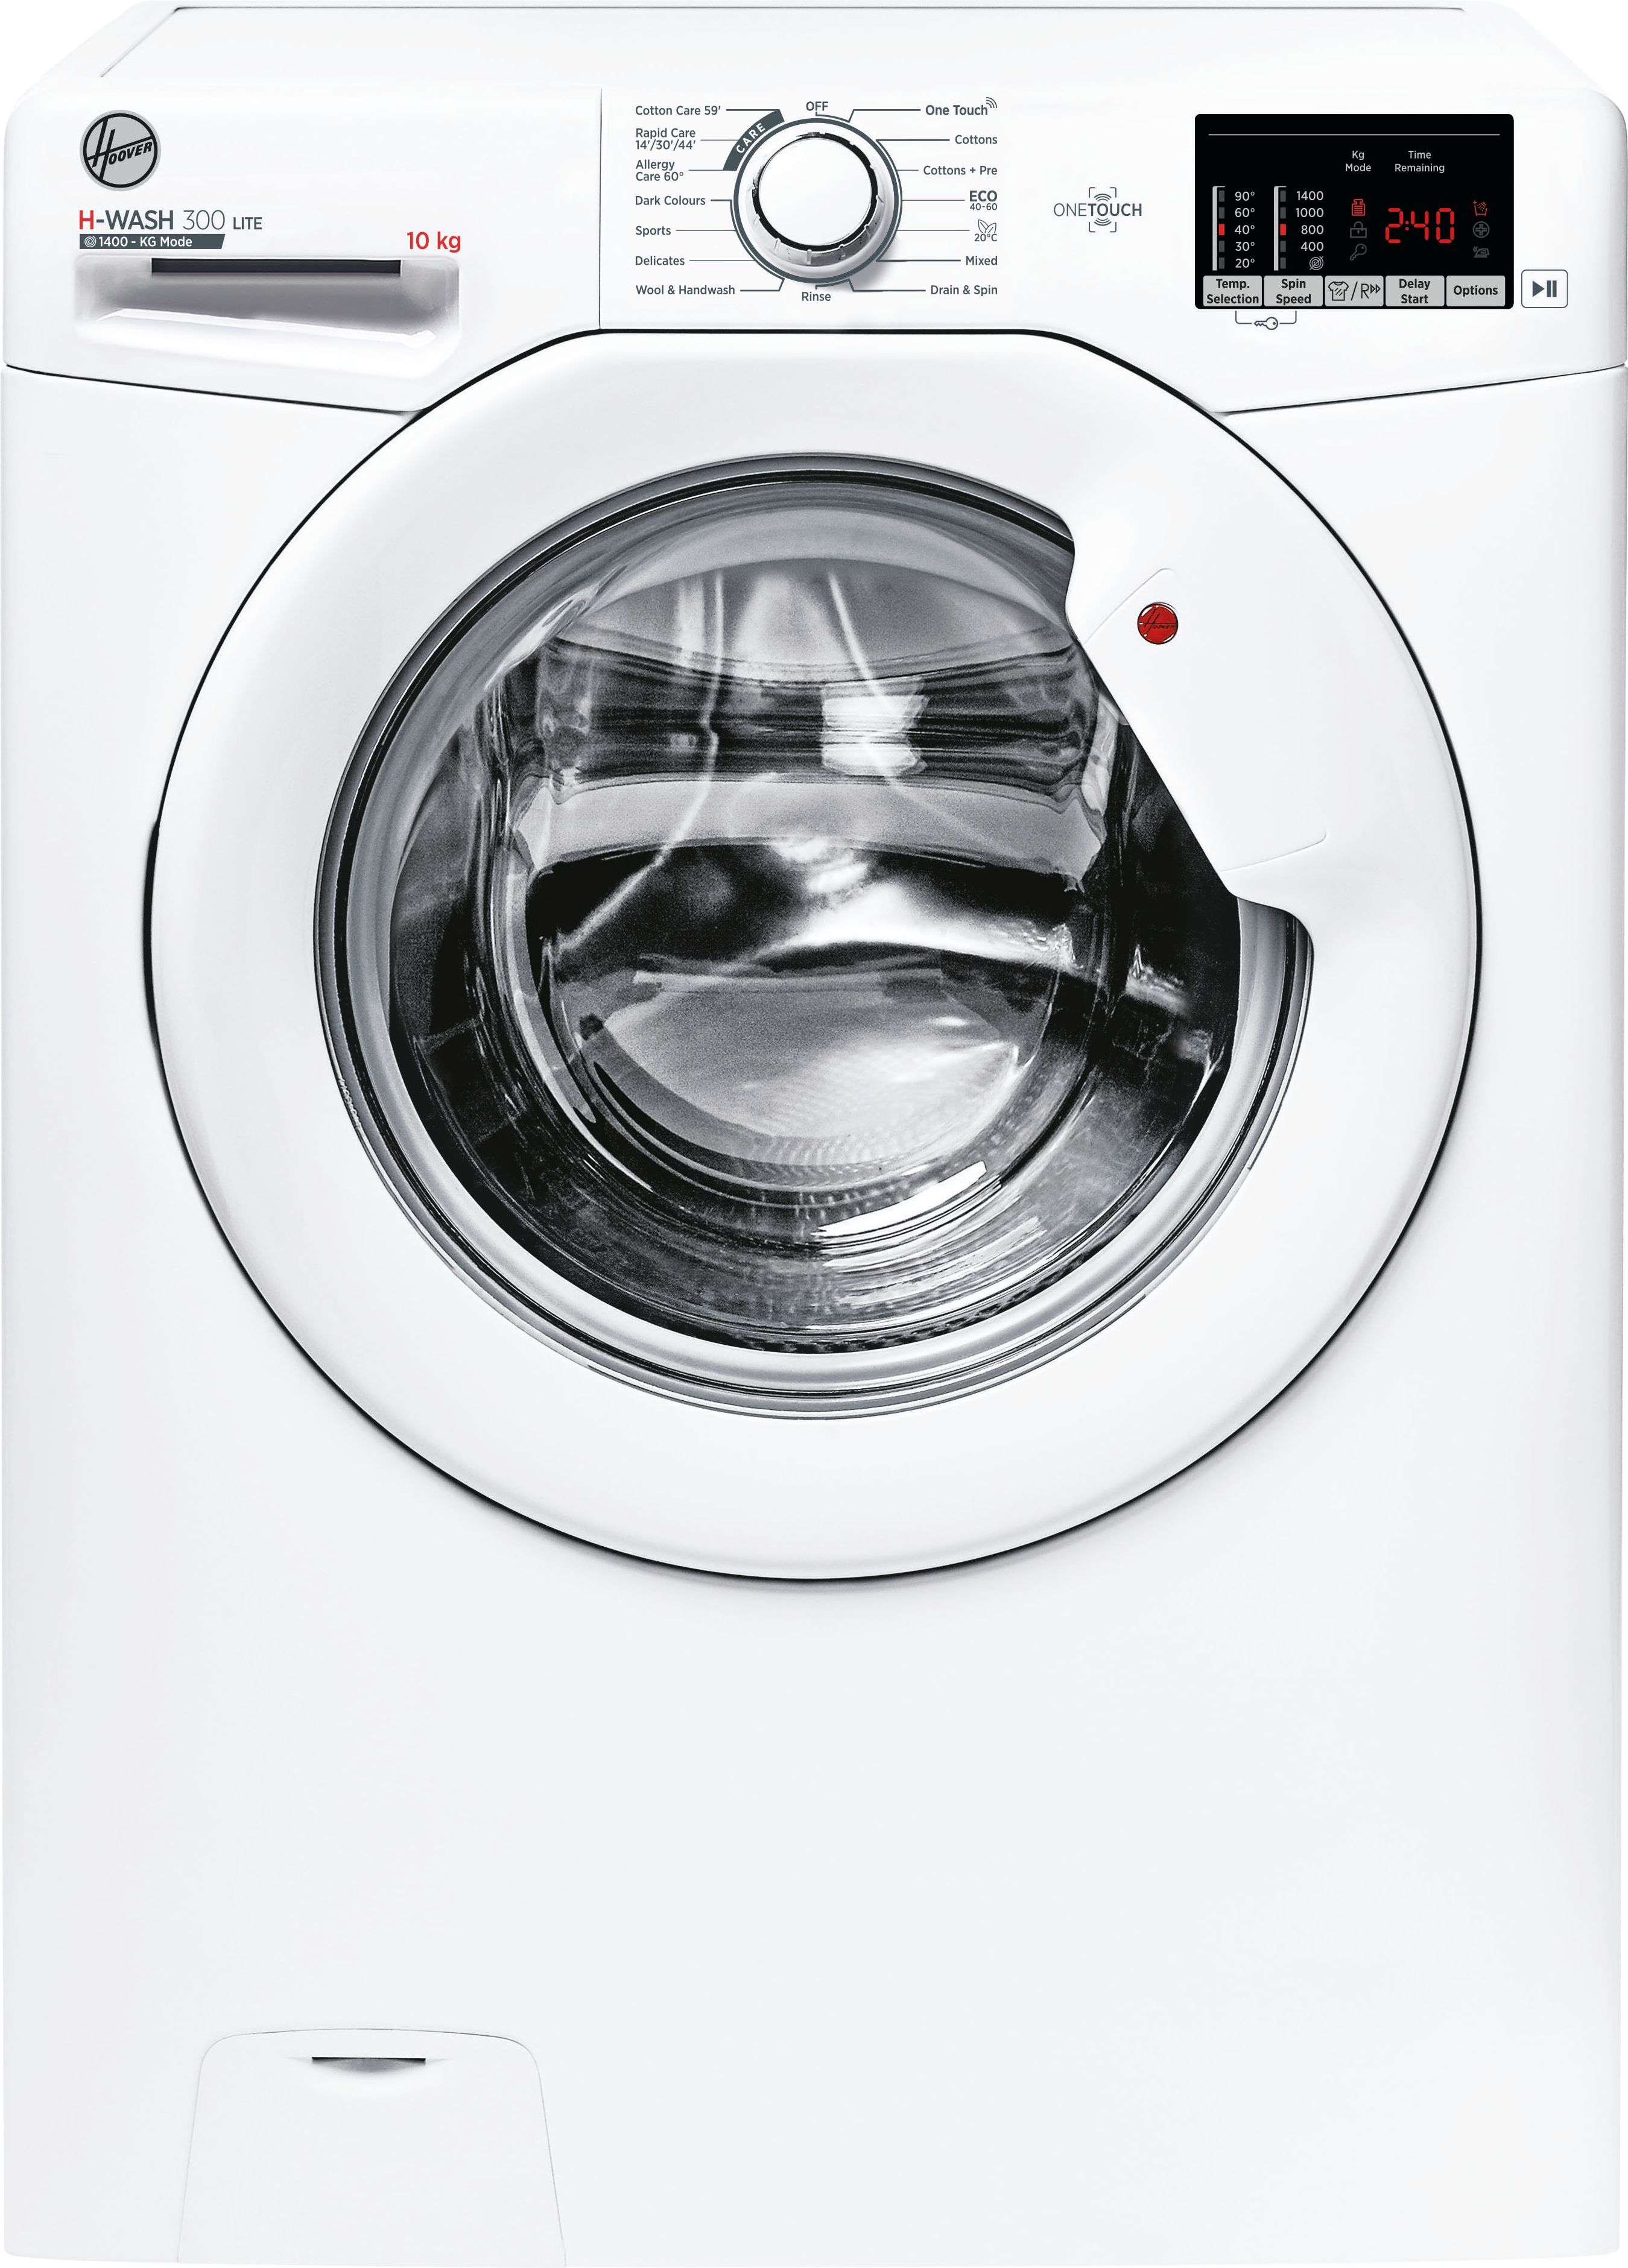 Hoover H-WASH 300 LITE H3W4102DAE 10kg Washing Machine with 1400 rpm - White - C Rated, White